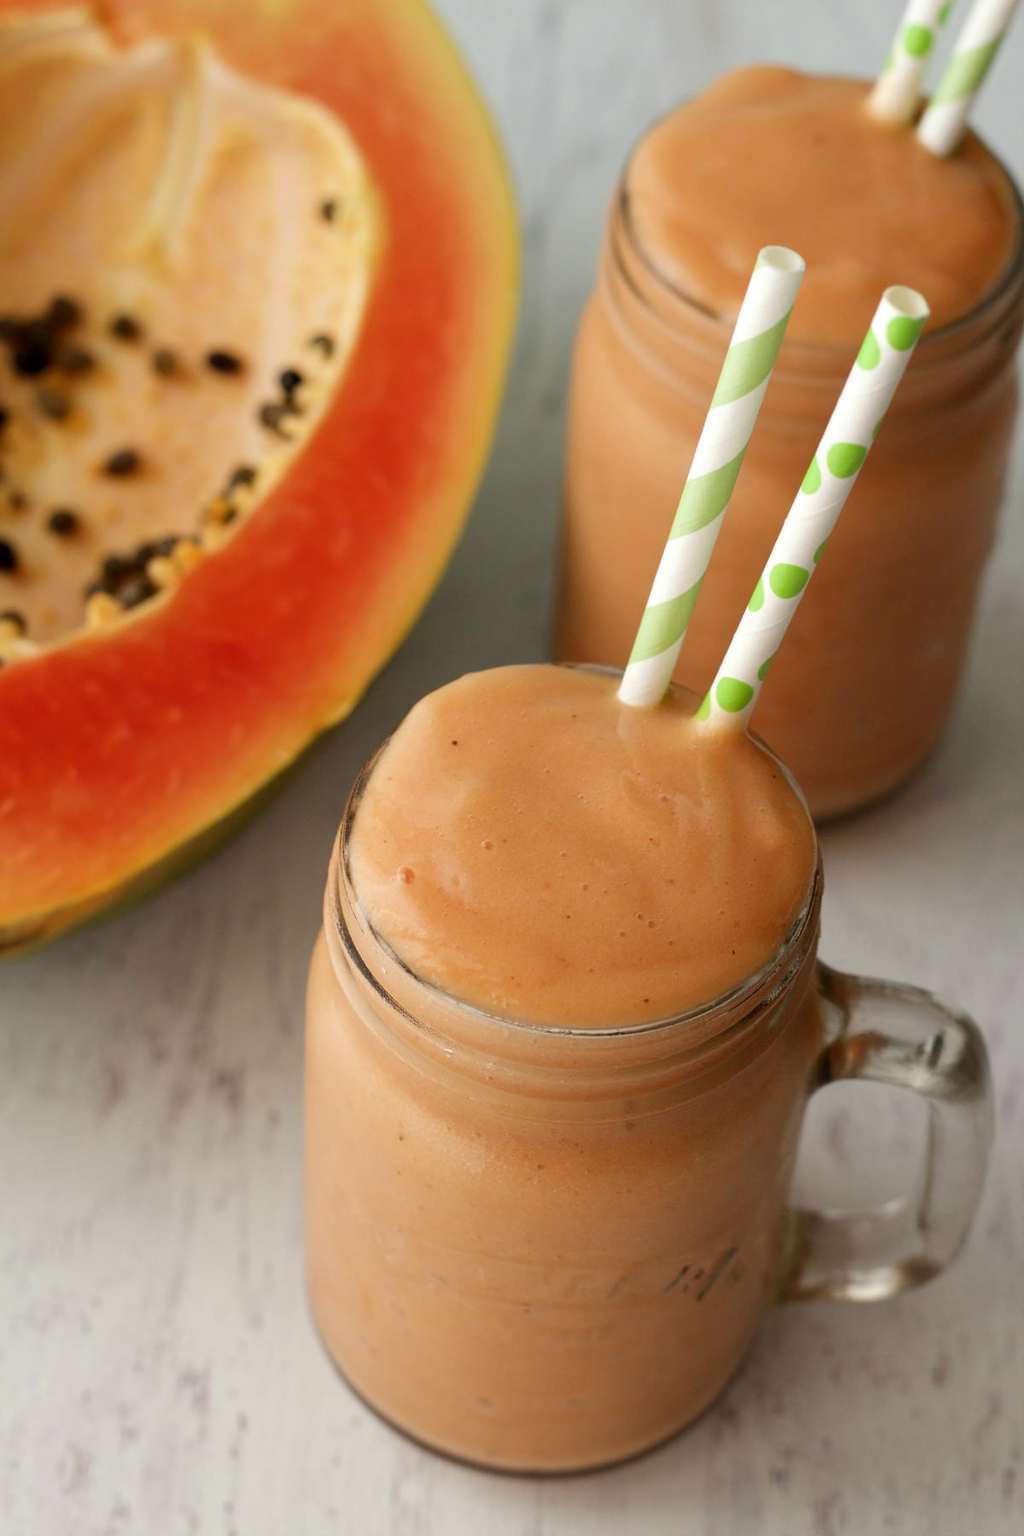 “Deliciously Nutritious: Papaya Smoothie Recipes for a Tropical Twist in Your Healthy Diet”